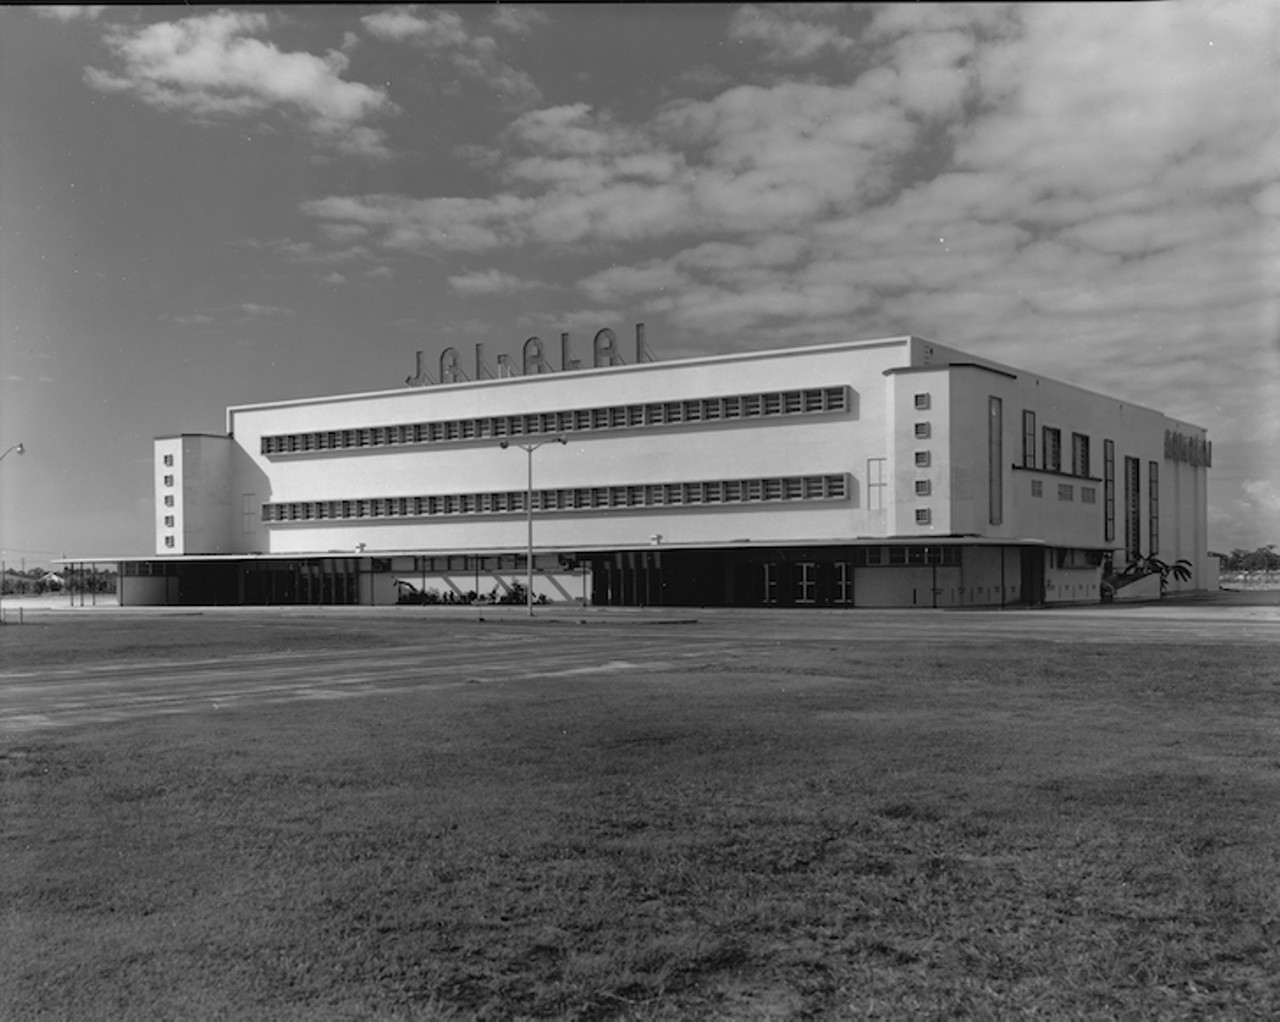 THEN
Tampa Jai-Alai Fronton building
5125 South Dale Mabry Highway, 1955. 
Jai Alai is a game brought to the United States from Cuba but had to fight for years to get established in Tampa due to parimutuel wagering laws. Played with a ball about the size and hardness of a golf ball and hurled against the wall, opponents had to catch the speeding sphere in long baskets (called cestas) tied to players hands. Customers wagered on the outcome of the game. The original site for Tampa Jai Alai was planned for just south of Henderson Boulevard on Dale Mabry, but was scrapped due to objections from residents and potential neighbor Christ the King Catholic Church. Opening in 1953 on Dale Mabry just south of Gandy, it was the second Jai Alai fronton in the country. Matches were played seasonally for years until innuendo arose that the games were fixed. The decline of the frontons popularity was compounded by the arrival of other competitive sports teams in Tampa, and gambling available at the new Seminole Casino. The last game at the 4000-seat Tampa Jai-Alai fronton was played on July 4, 1979.